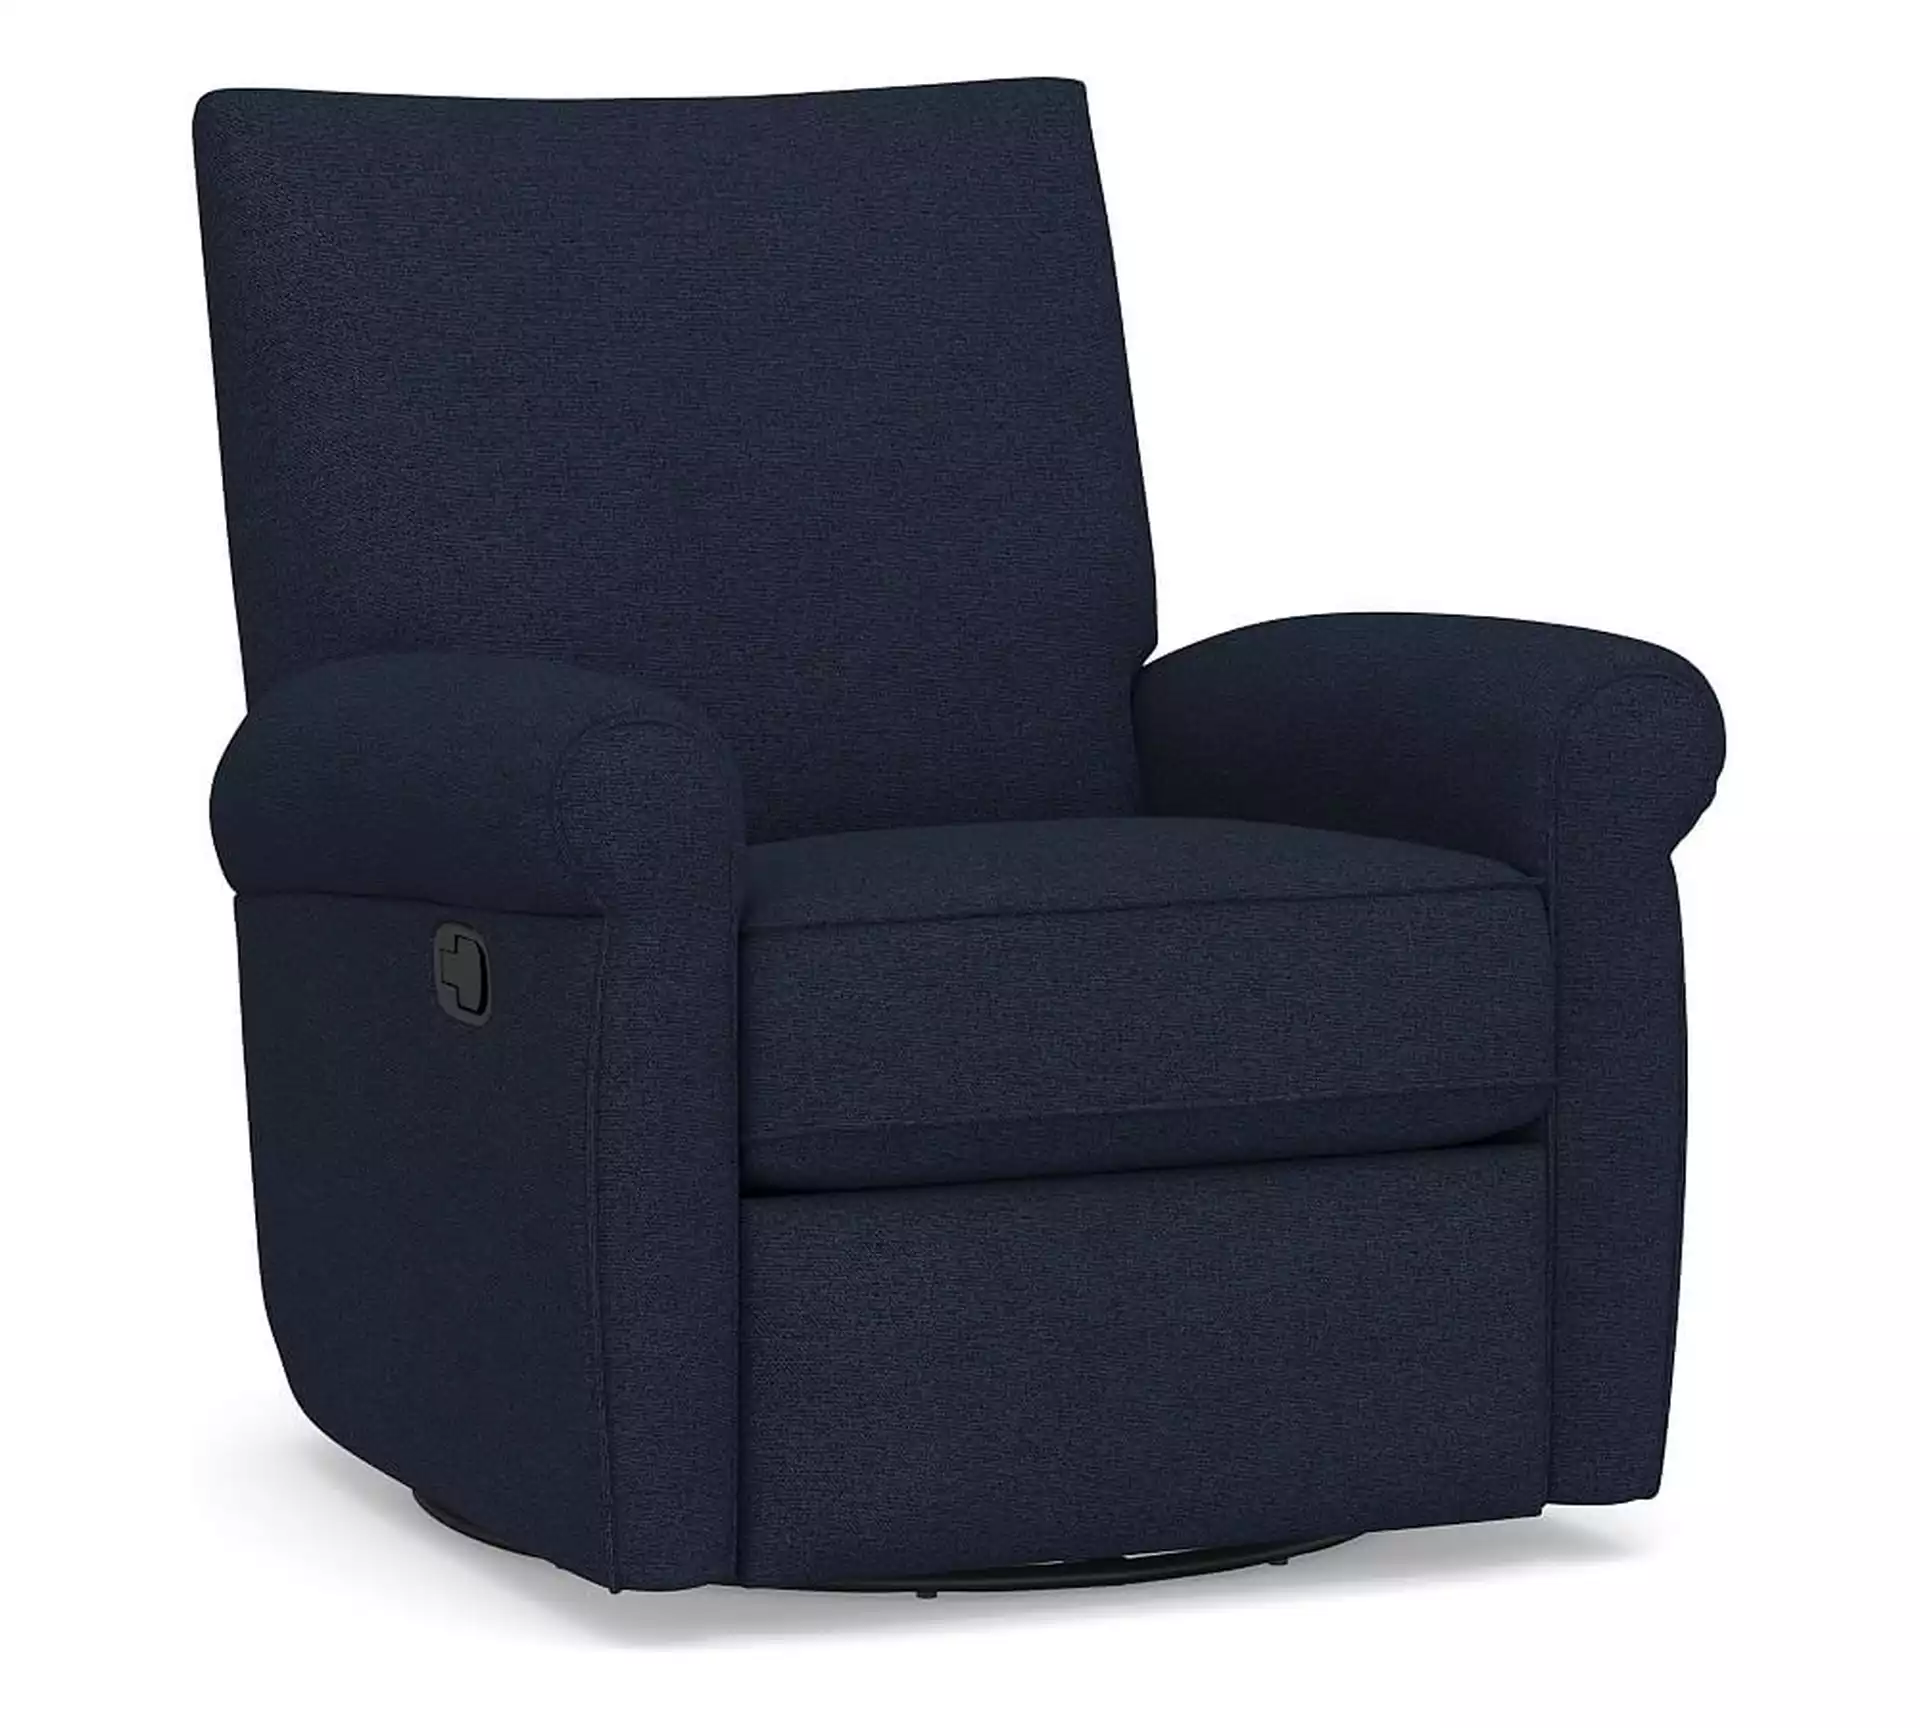 Grayson Roll Arm Upholstered Swivel Recliner, Polyester Wrapped Cushions, Performance Heathered Basketweave Navy